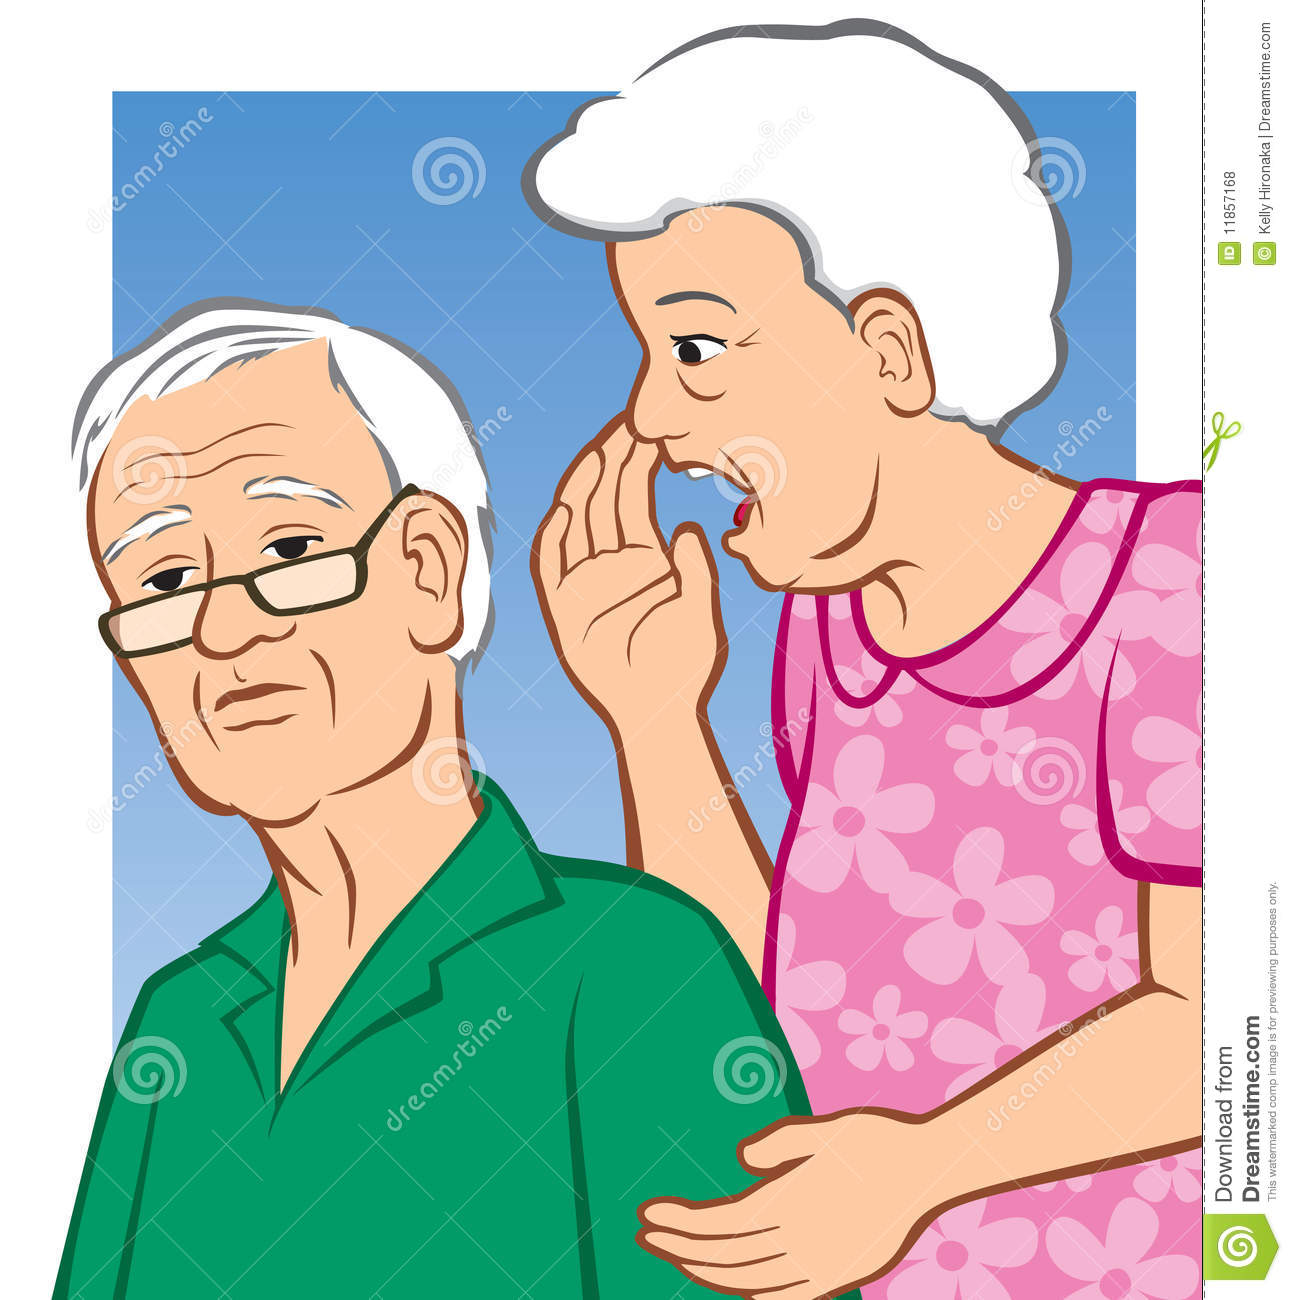 Vector Illustration Of An Elderly Woman Yelling In Her Husband S Ear